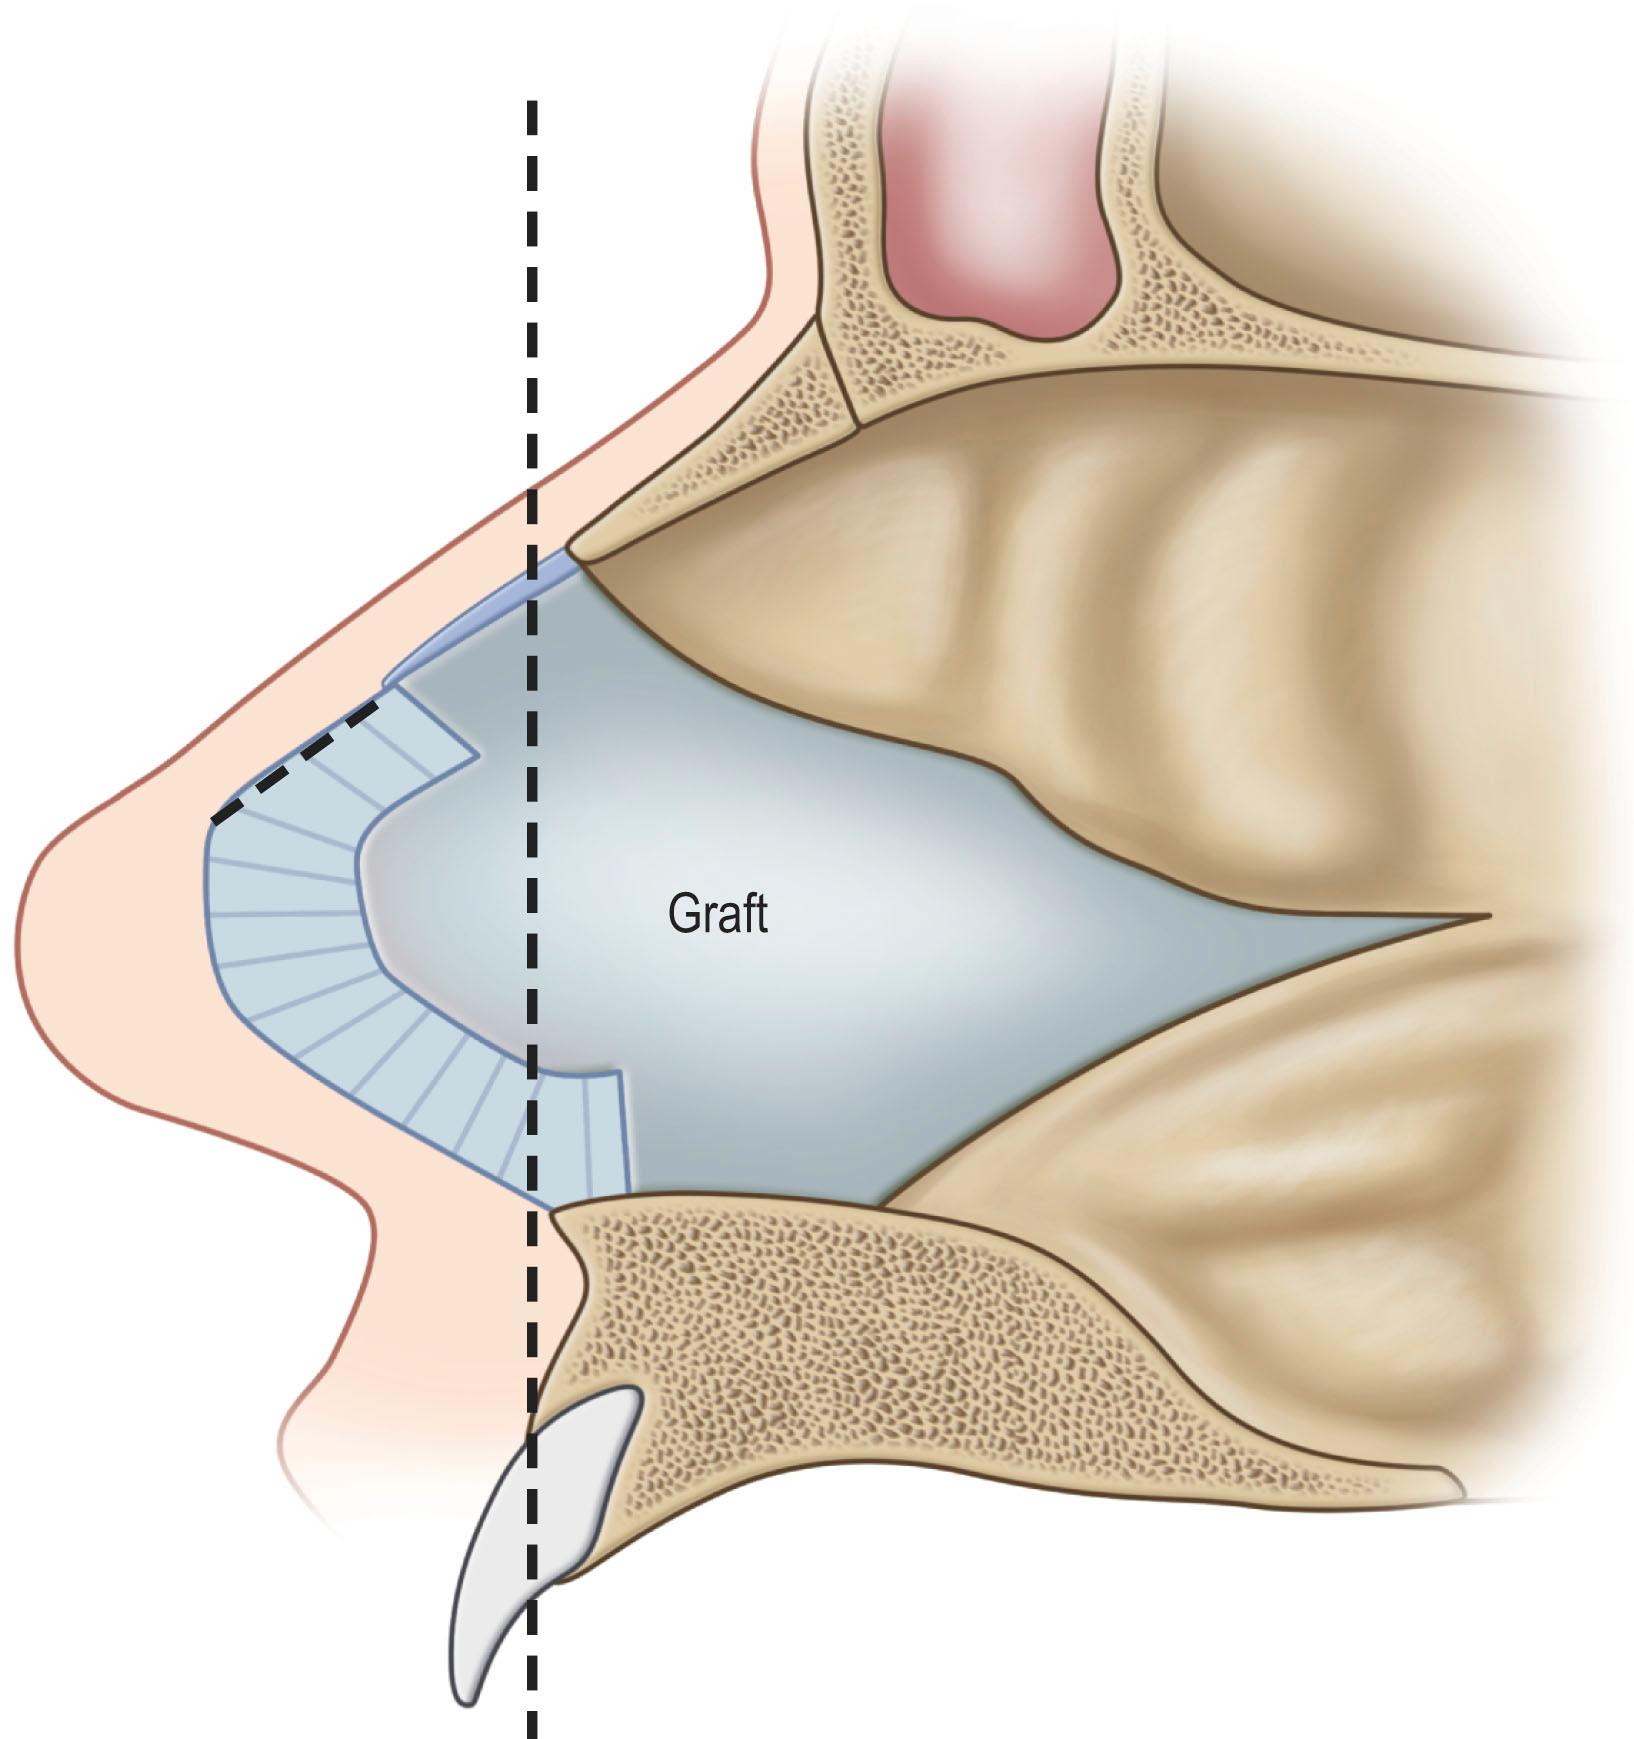 Figure 19.13, Harvest of nasal septal cartilage graft. It is important to keep the L-shaped strut cartilage (striped area) to provide nasal support. The area of septum that attaches to the upper lateral cartilages should also be preserved. Generally, nonsupportive quadrangular cartilage, which is pictured posterior to the dashed vertical line, can be harvested freely.